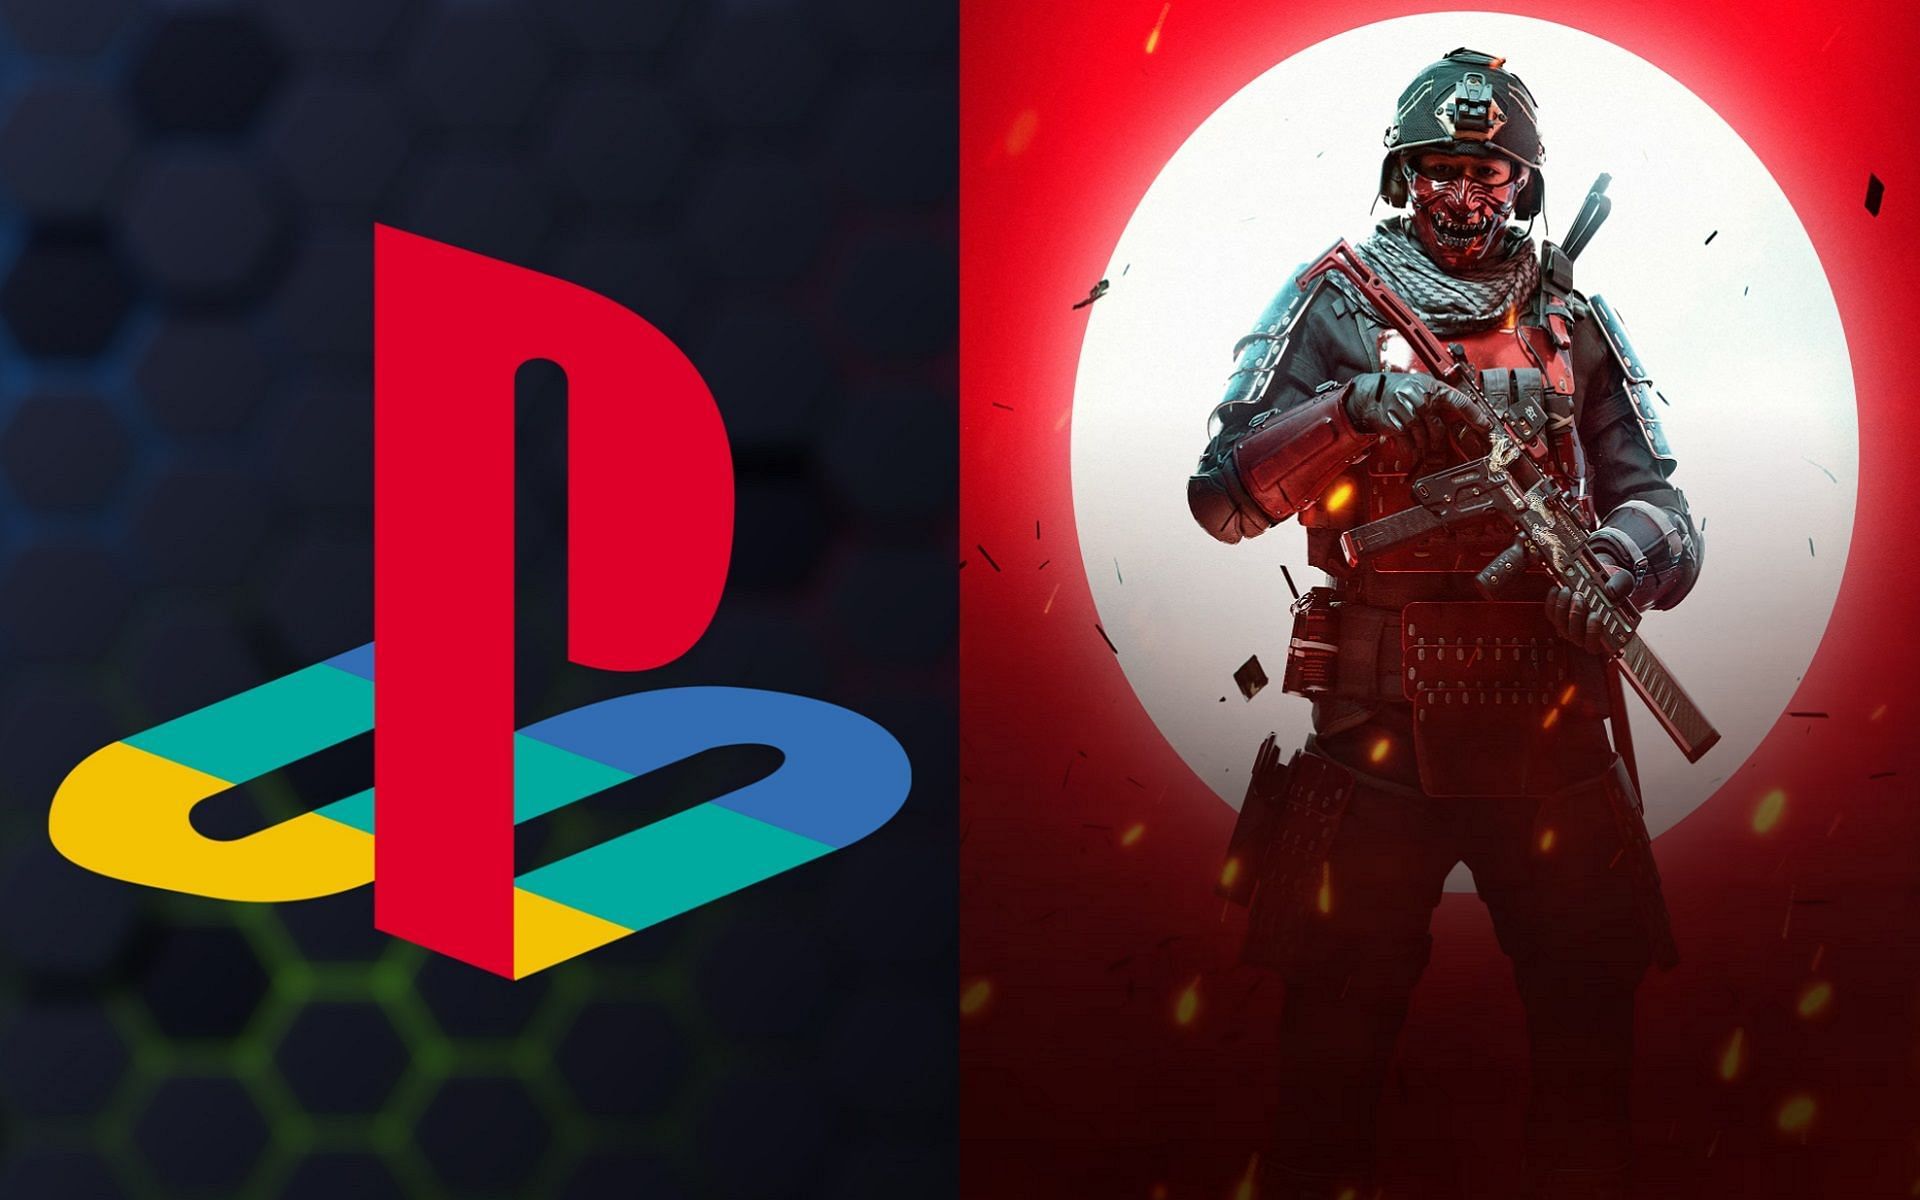 Process of getting Crimson Way PlayStation Combat pack for free revealed (Image via Sportskeeda)